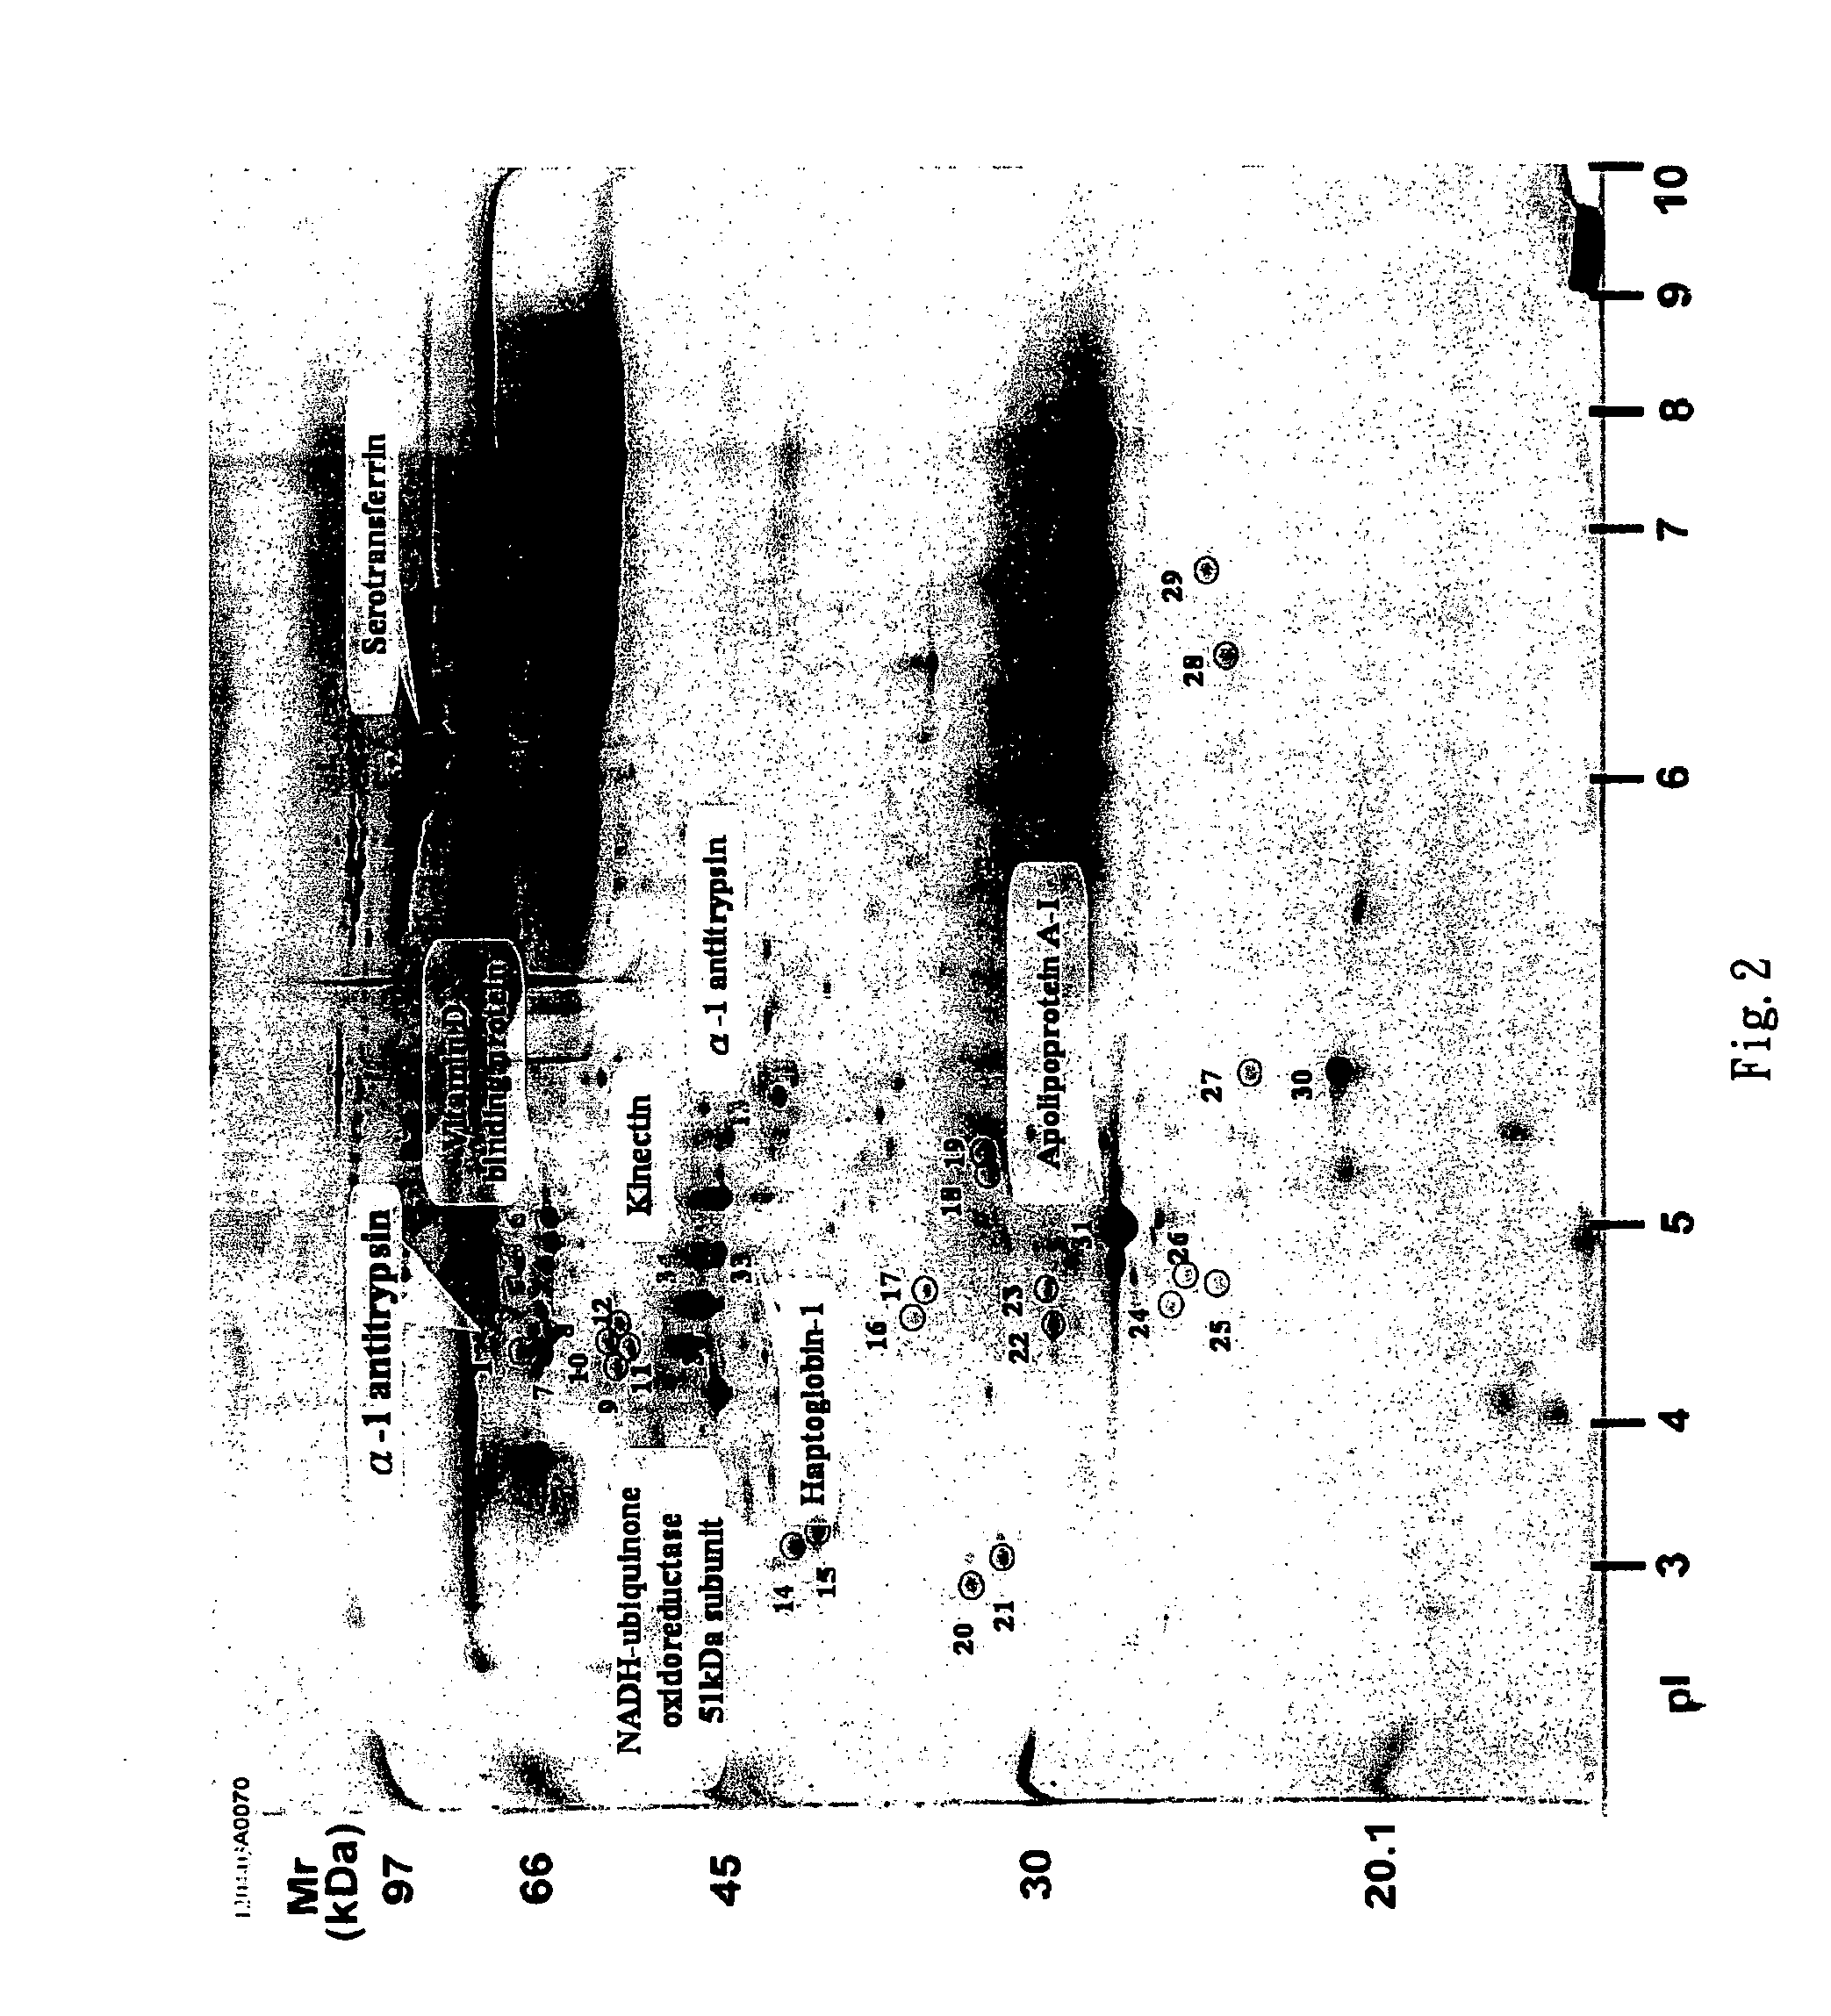 Diagnosis method of endometriosis by detecting biochemical markers and usage of these biochemical markers